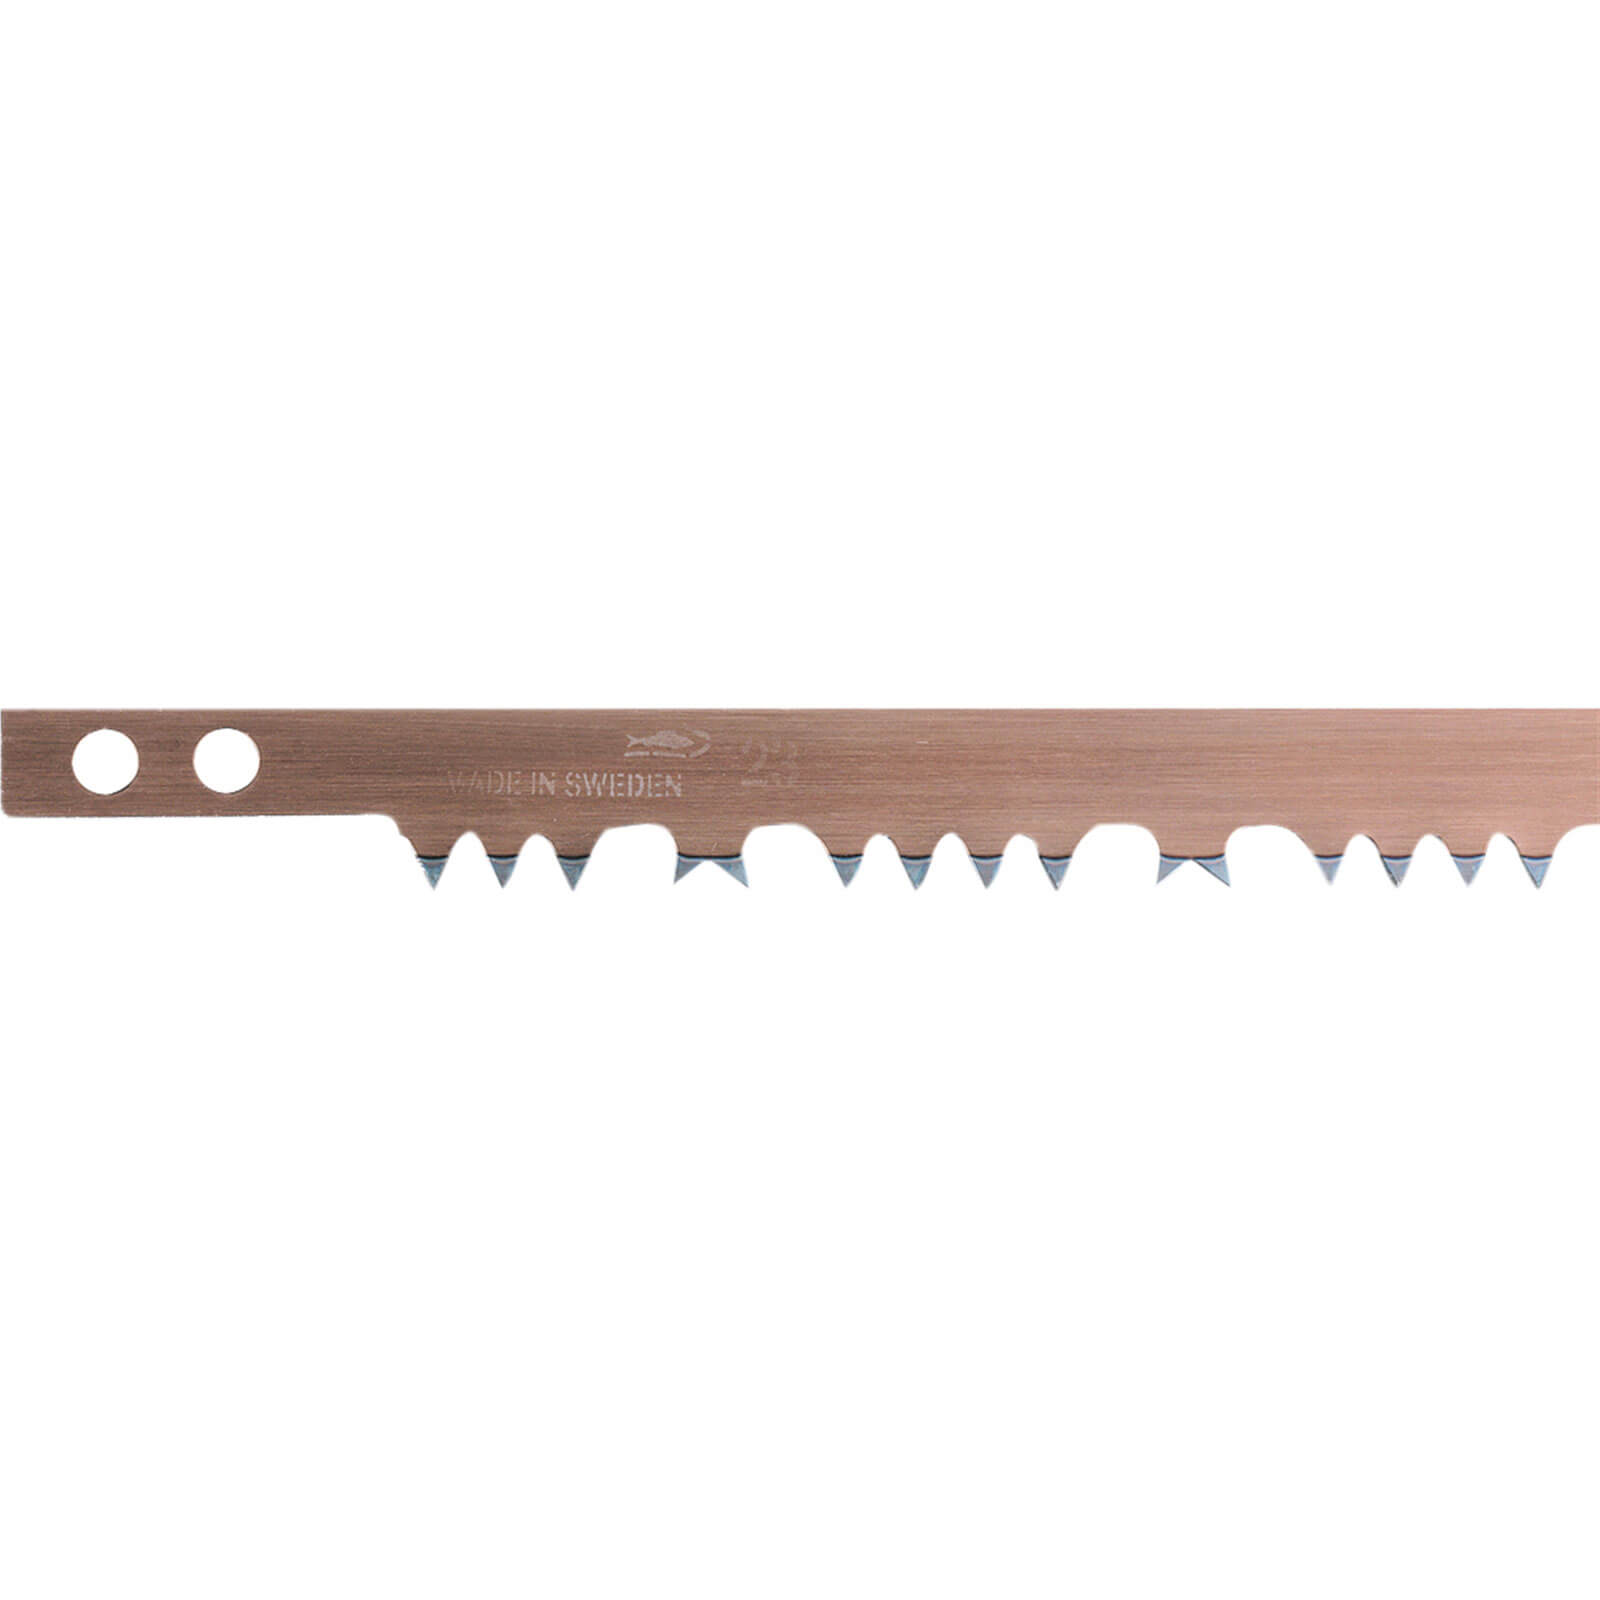 Bahco Raker Tooth Hard Point Bowsaw Blade 30" / 759mm For Green Wood